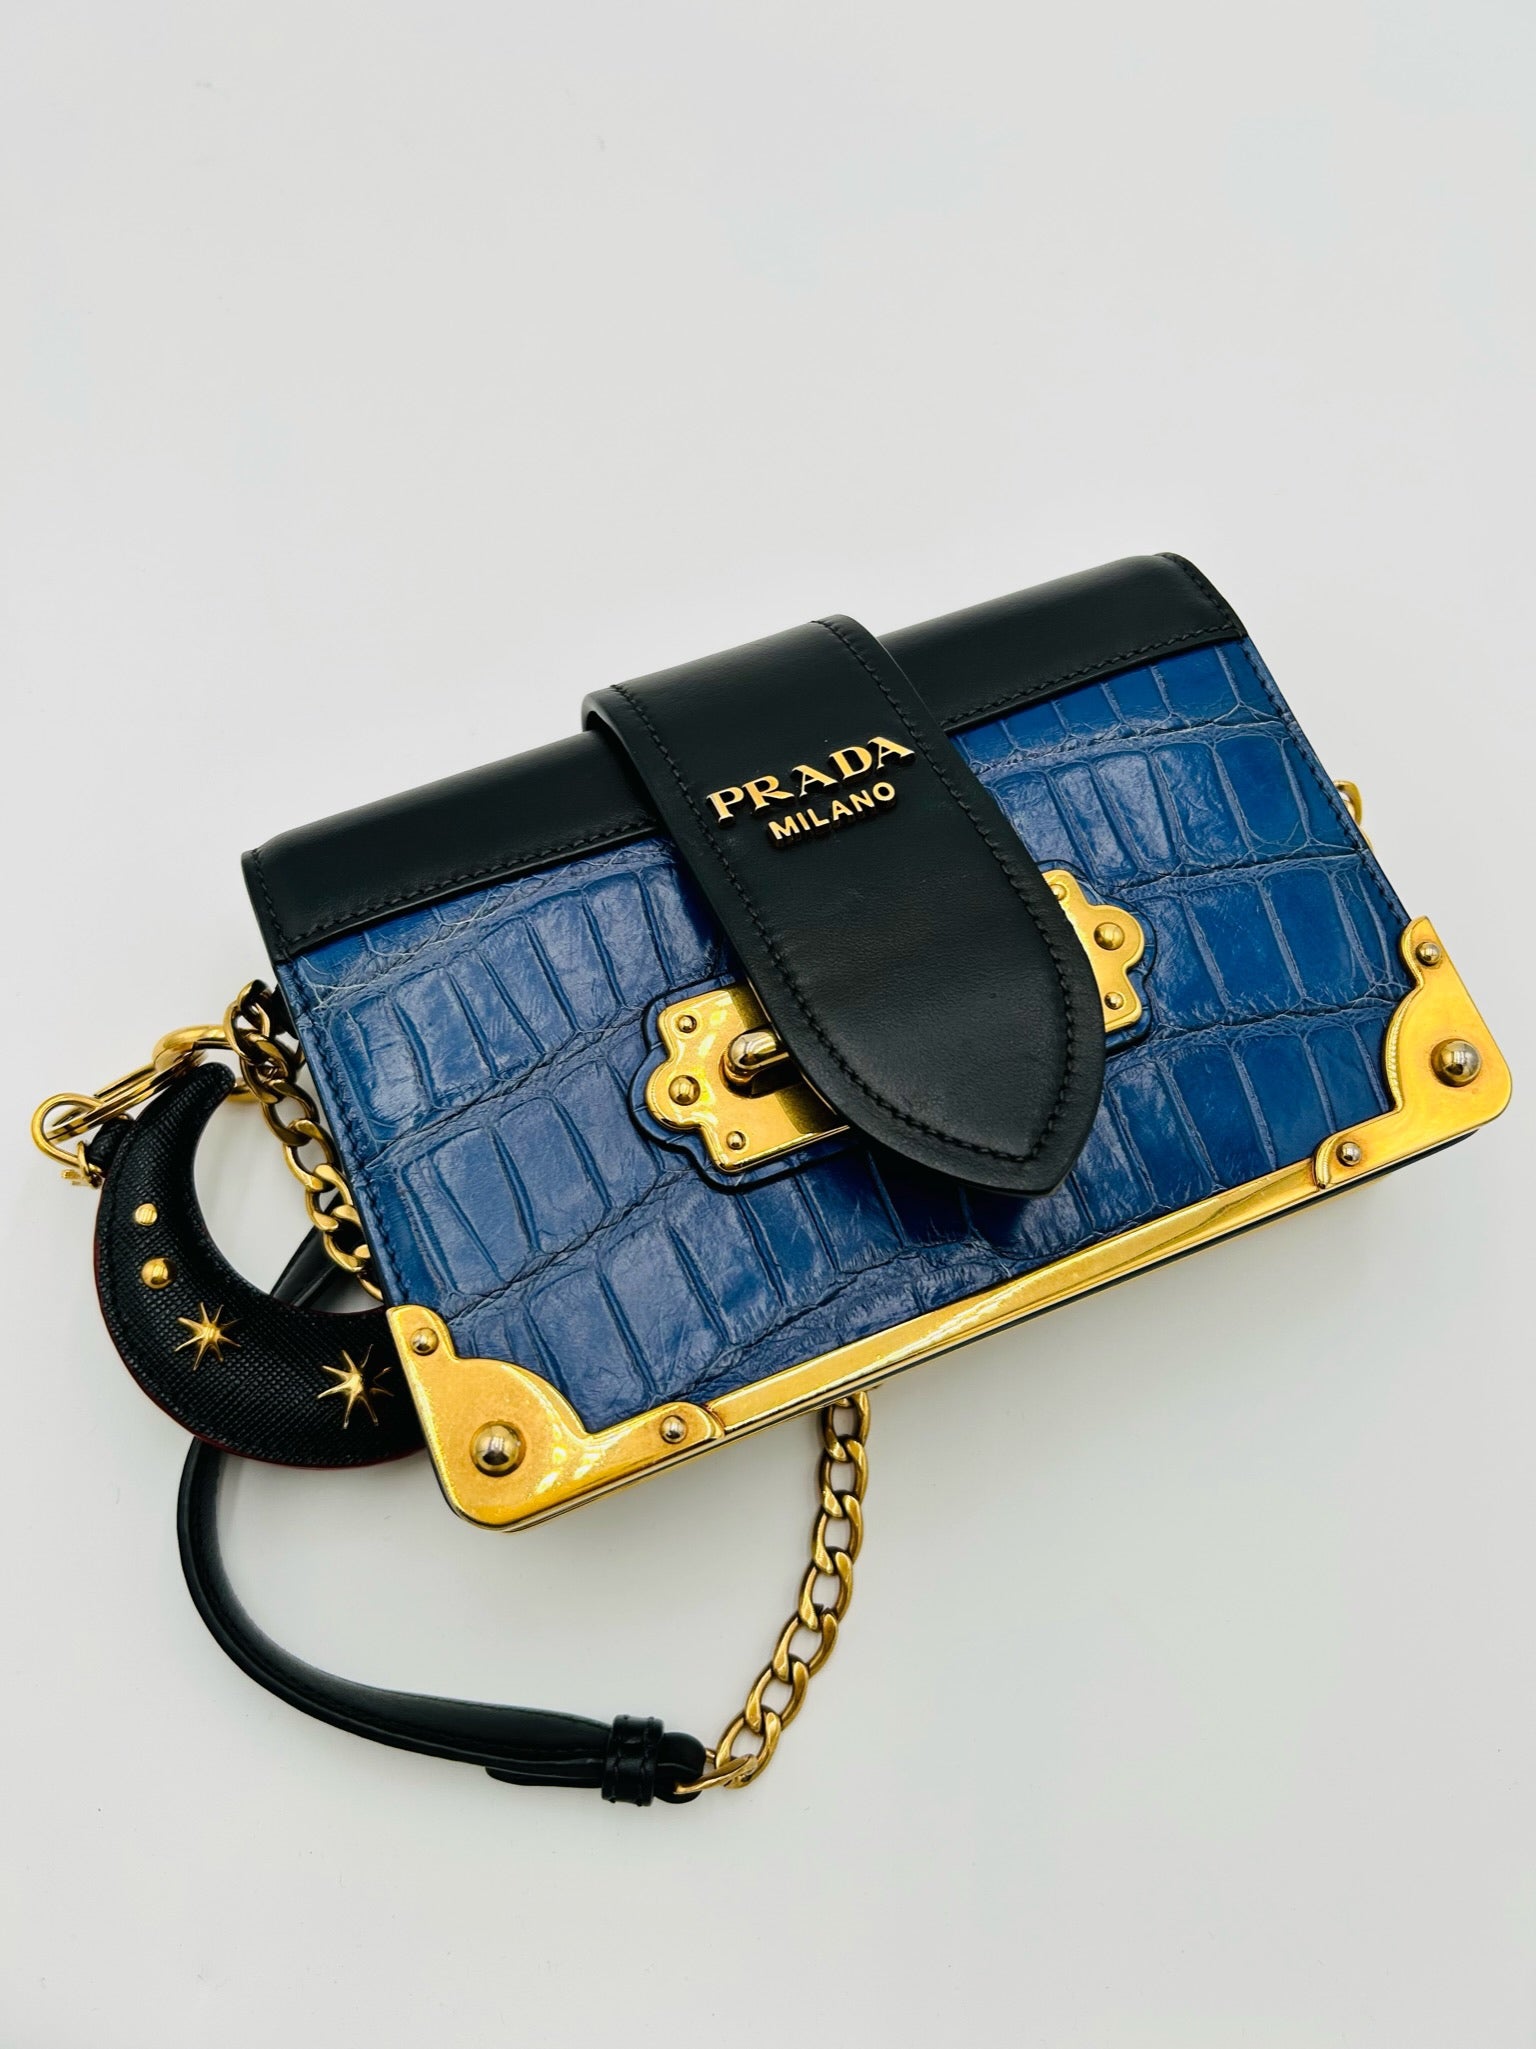 PRADA SPECIAL EDITION CAHIER LEATHER SHOULDER BAG WITH MOON CHARM